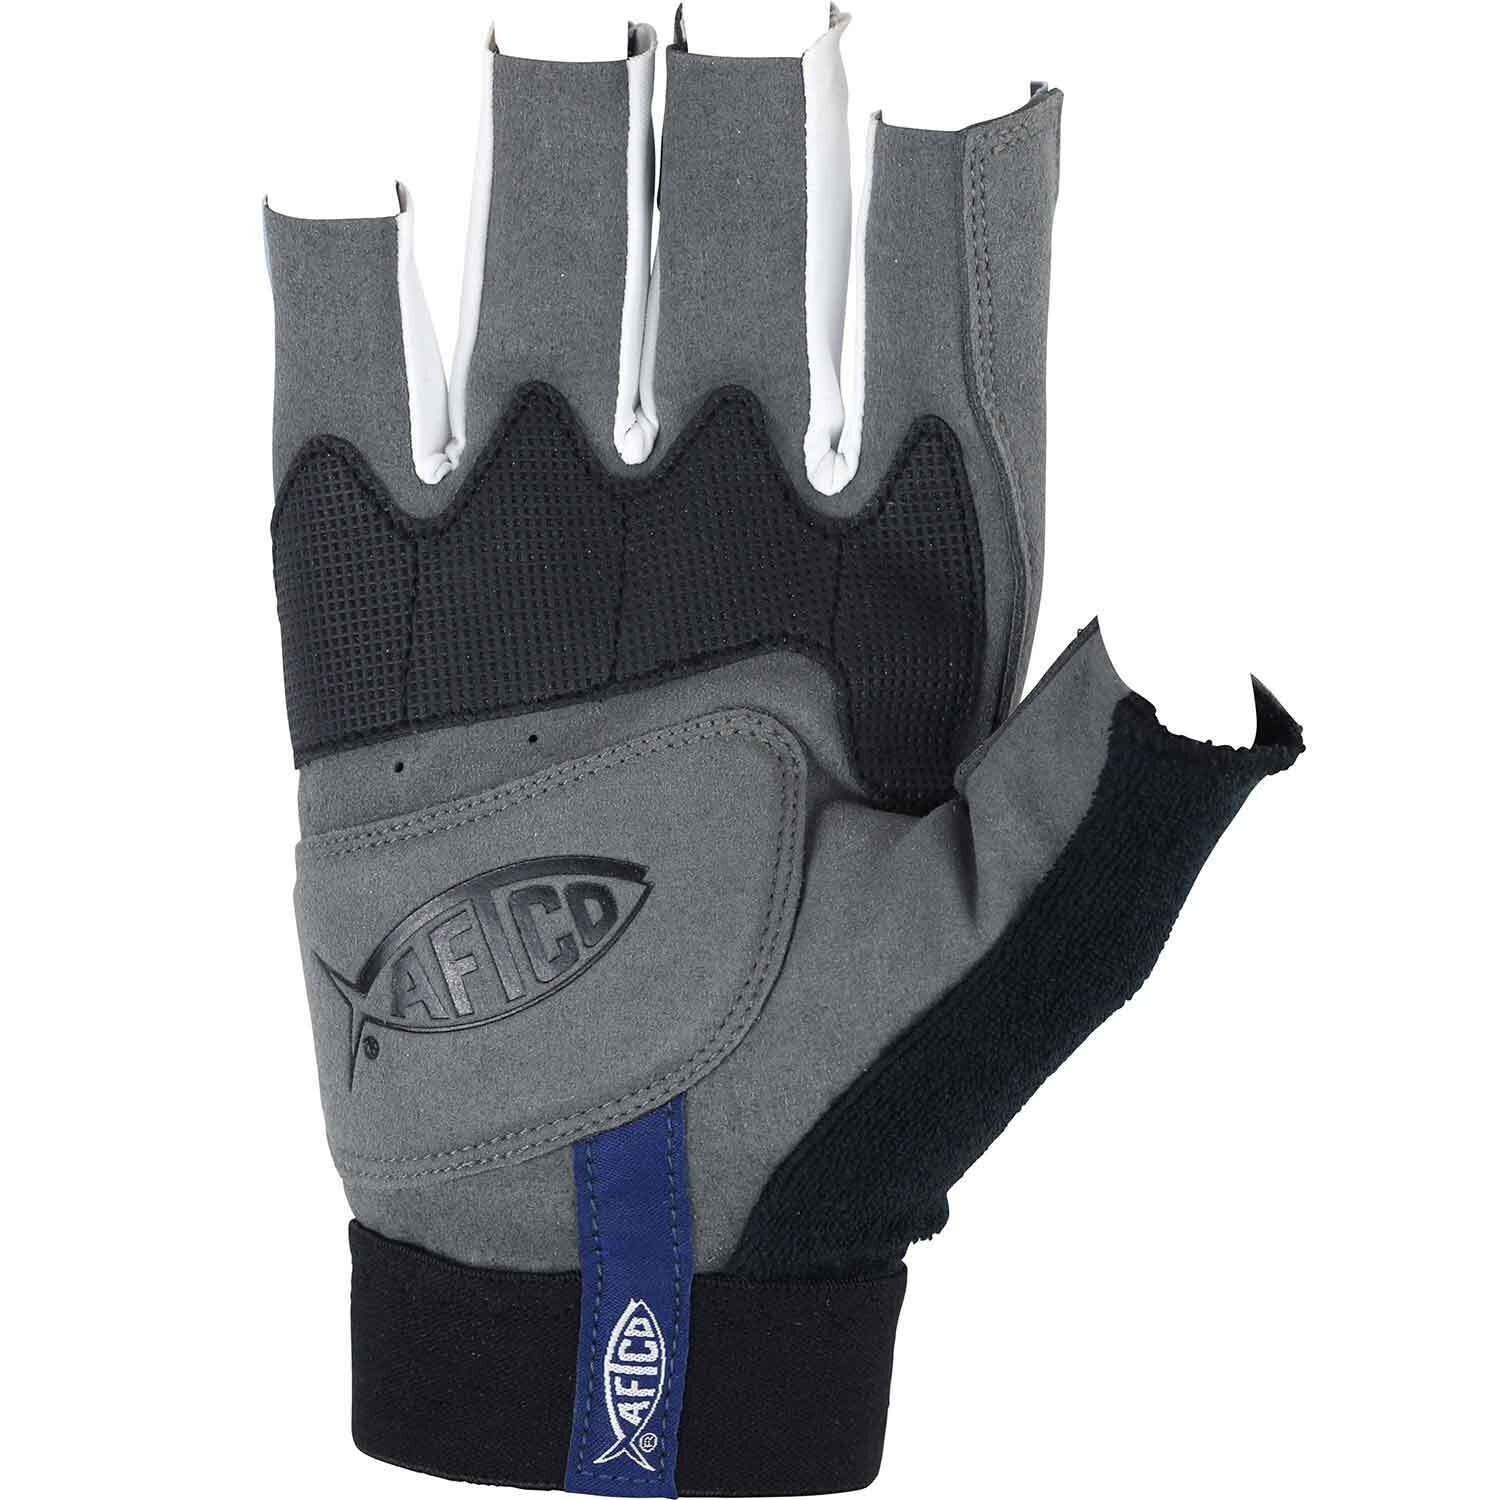 AFTCO Solmar UV Sun Protection Fishing Glove Pick Your Size Free Shipping 